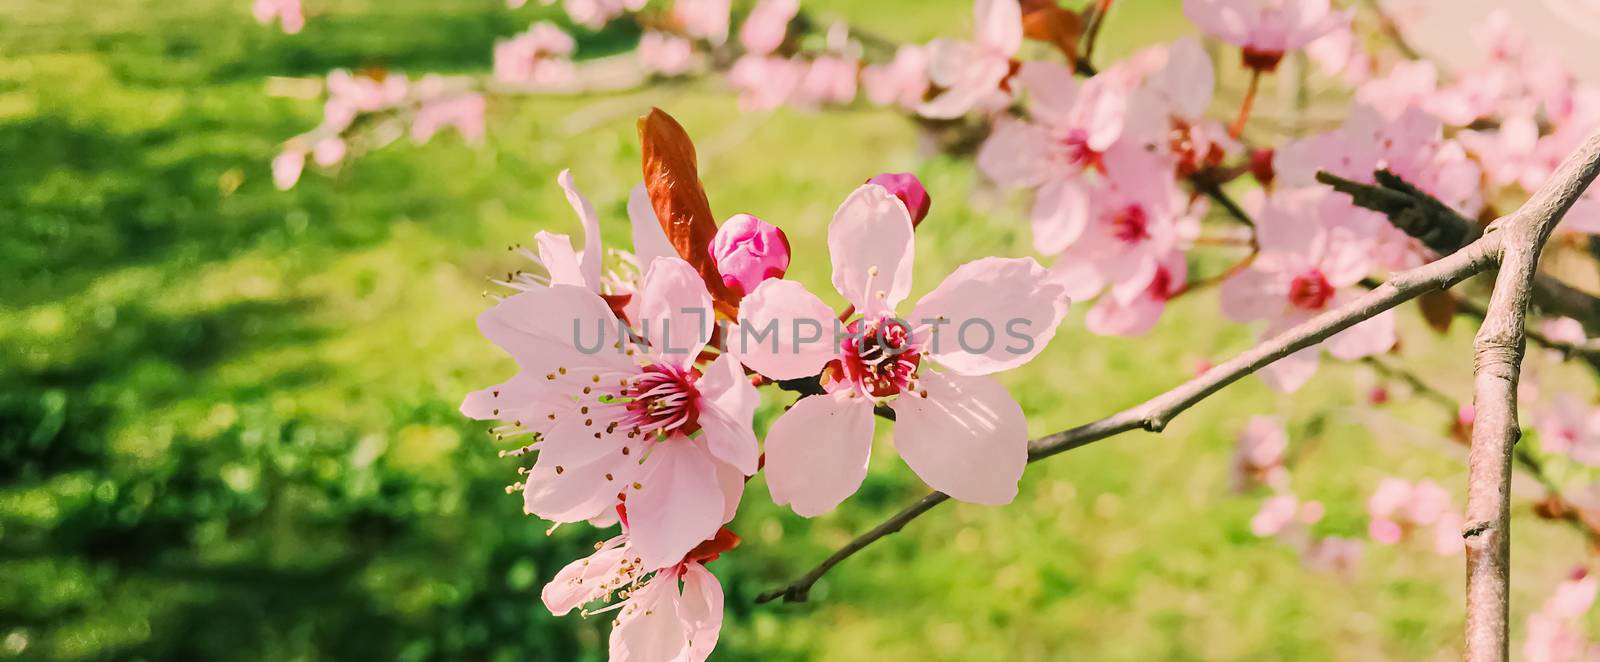 Apple tree flowers bloom, floral blossom in spring by Anneleven